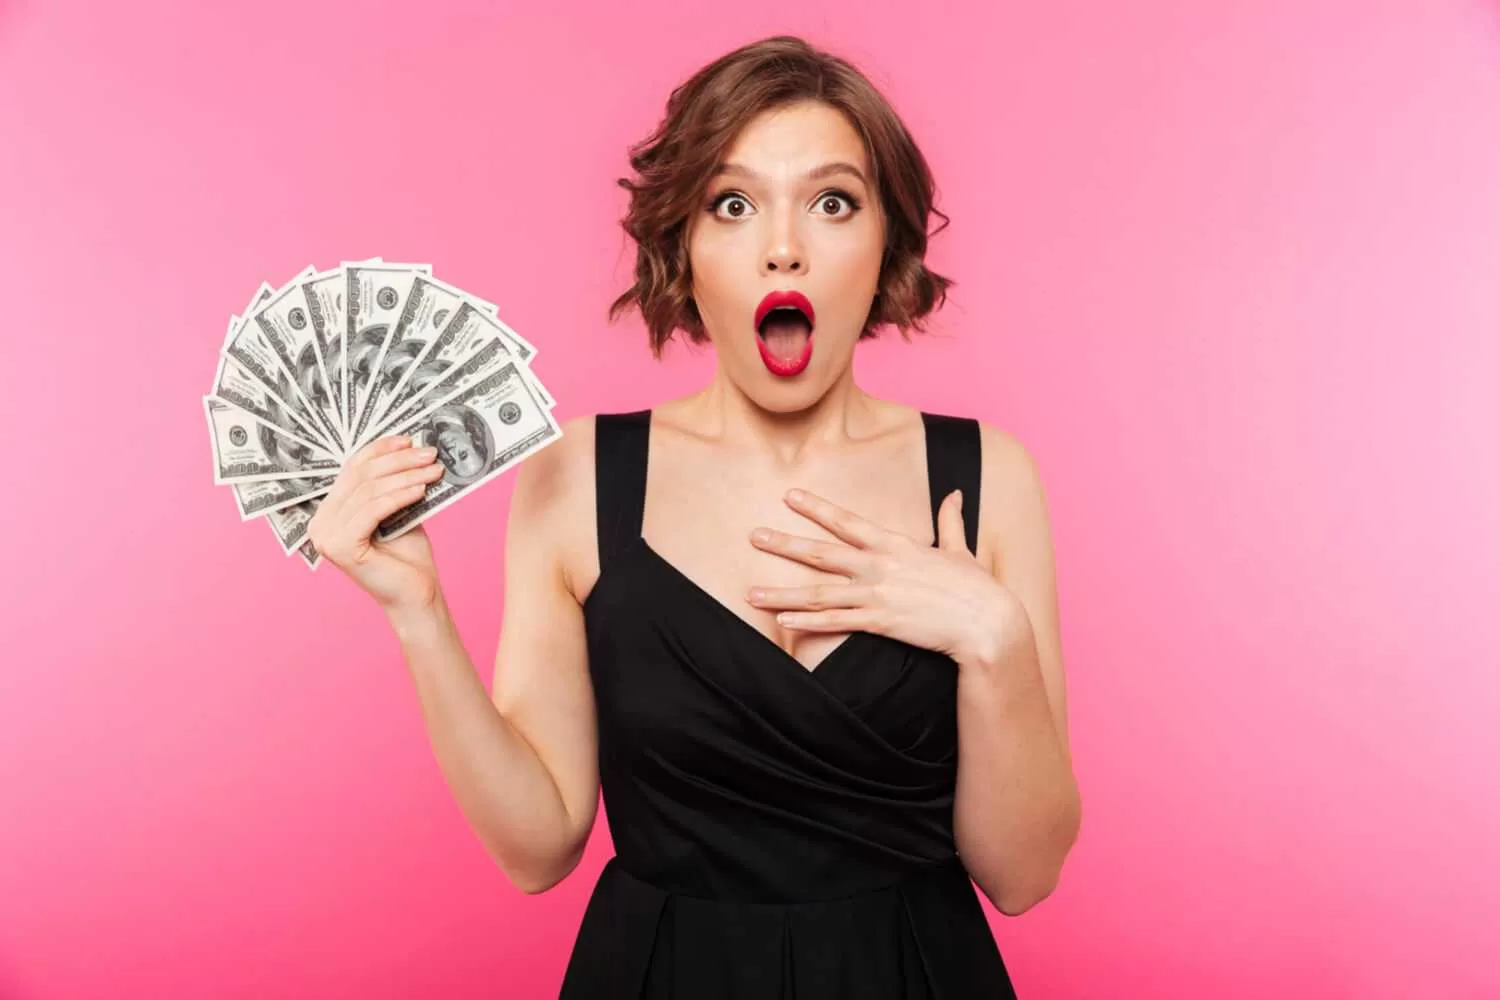 A woman holding a bunch of money in shock. Overcome the control of the Central Bank Digital Currency and start making money like her